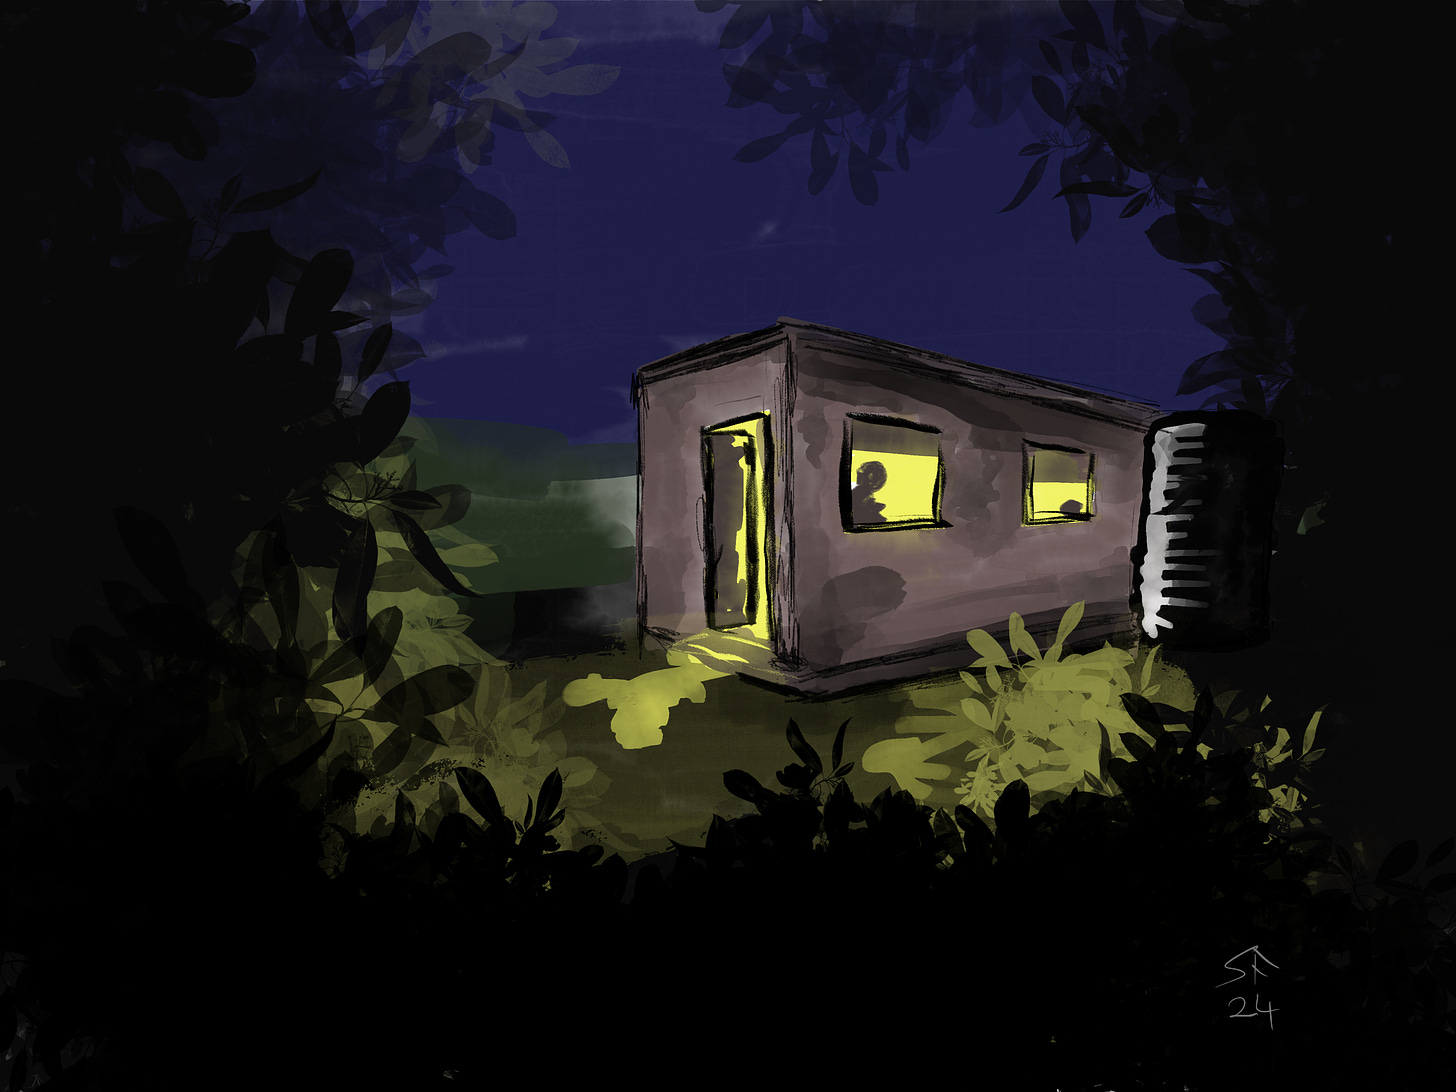 Cartoon: cabin at night, door open and light spilling out; two figures inside, the one at the door is standing.